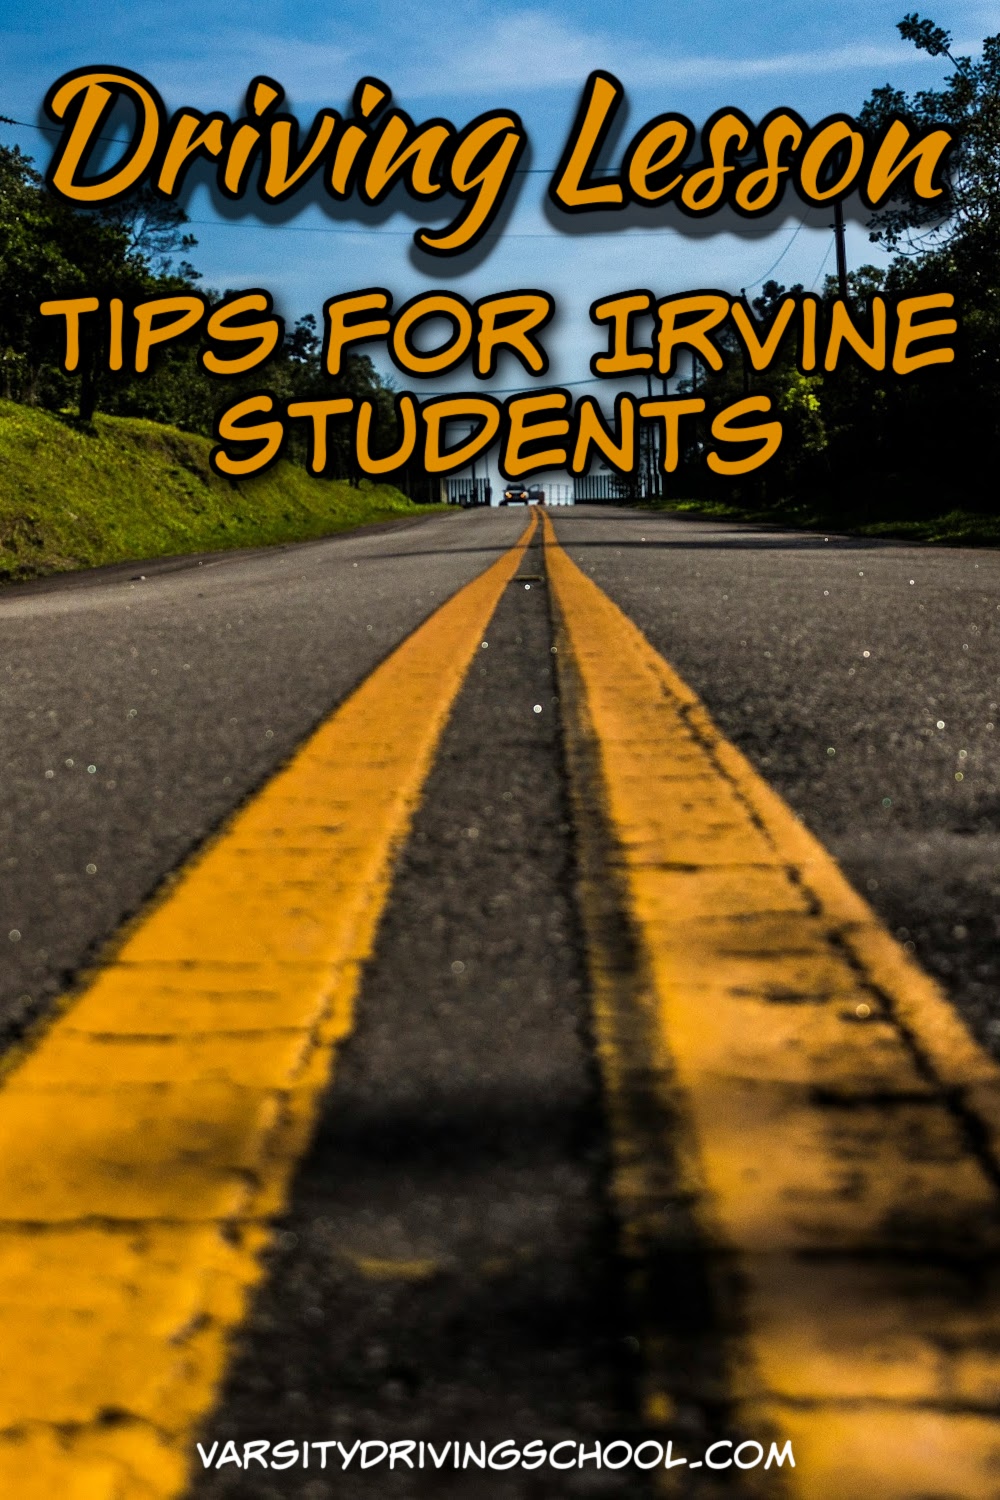 Irvine driving lessons tips can help students get through the process while also increasing their odds of passing the Irvine DMV test!